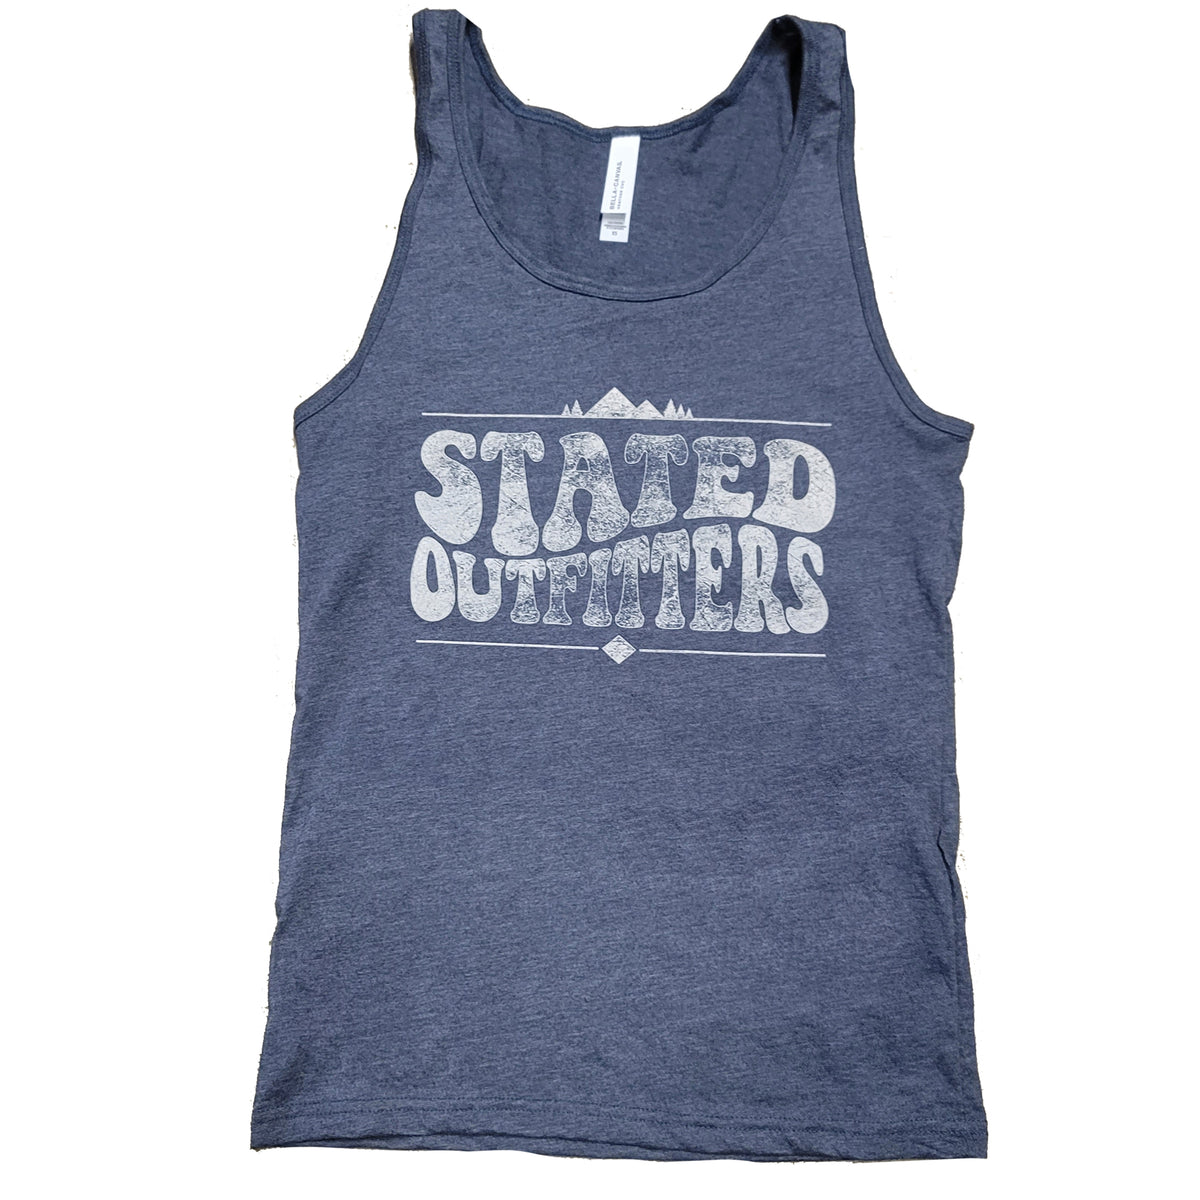 Stated Outfitters Funky Tank